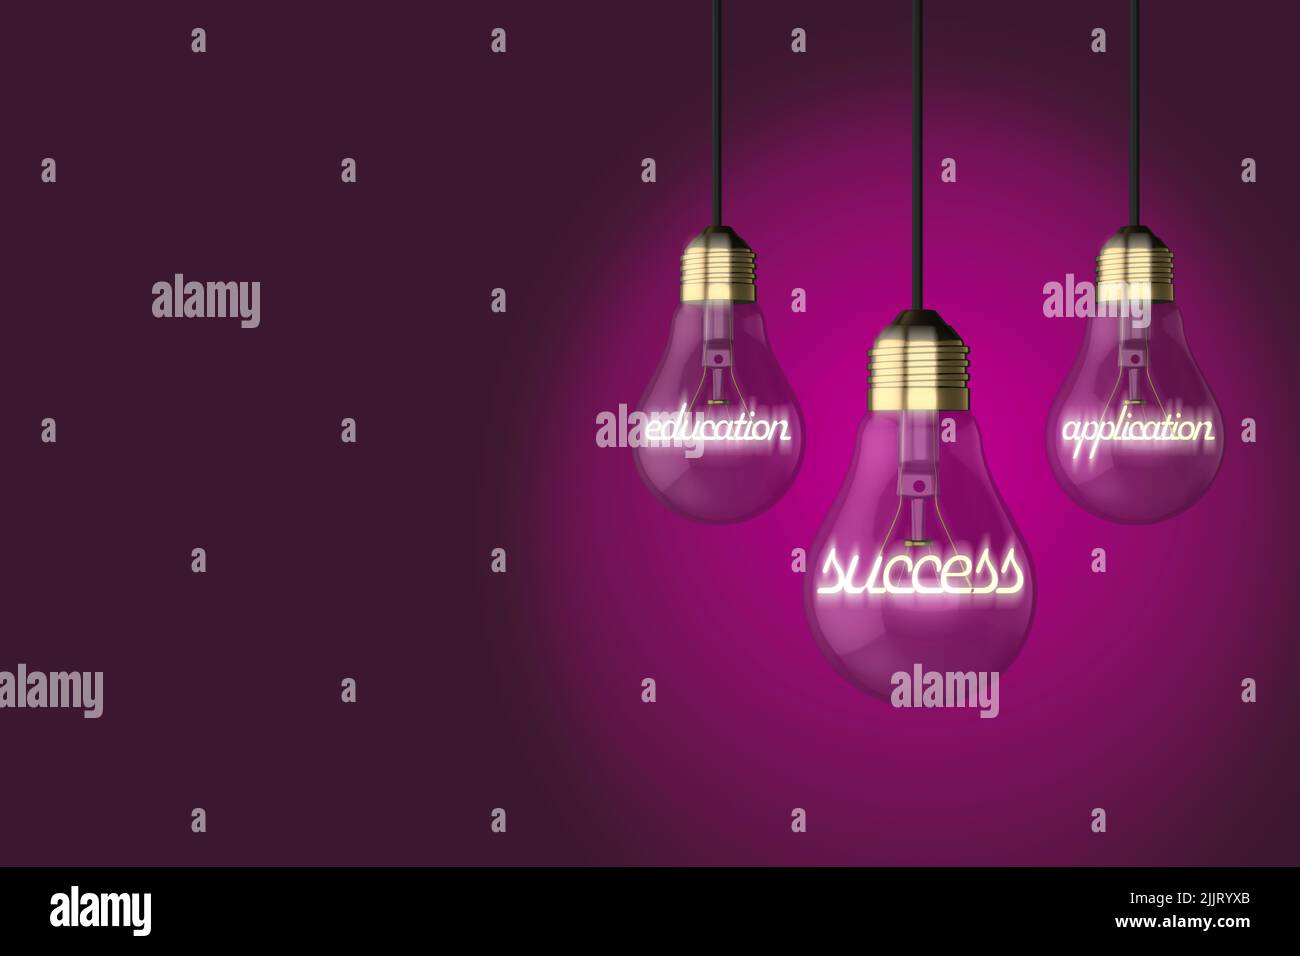 Education concept old style light bulb light bulbs education application success concept glowing text on a cerice pink background Stock Photo